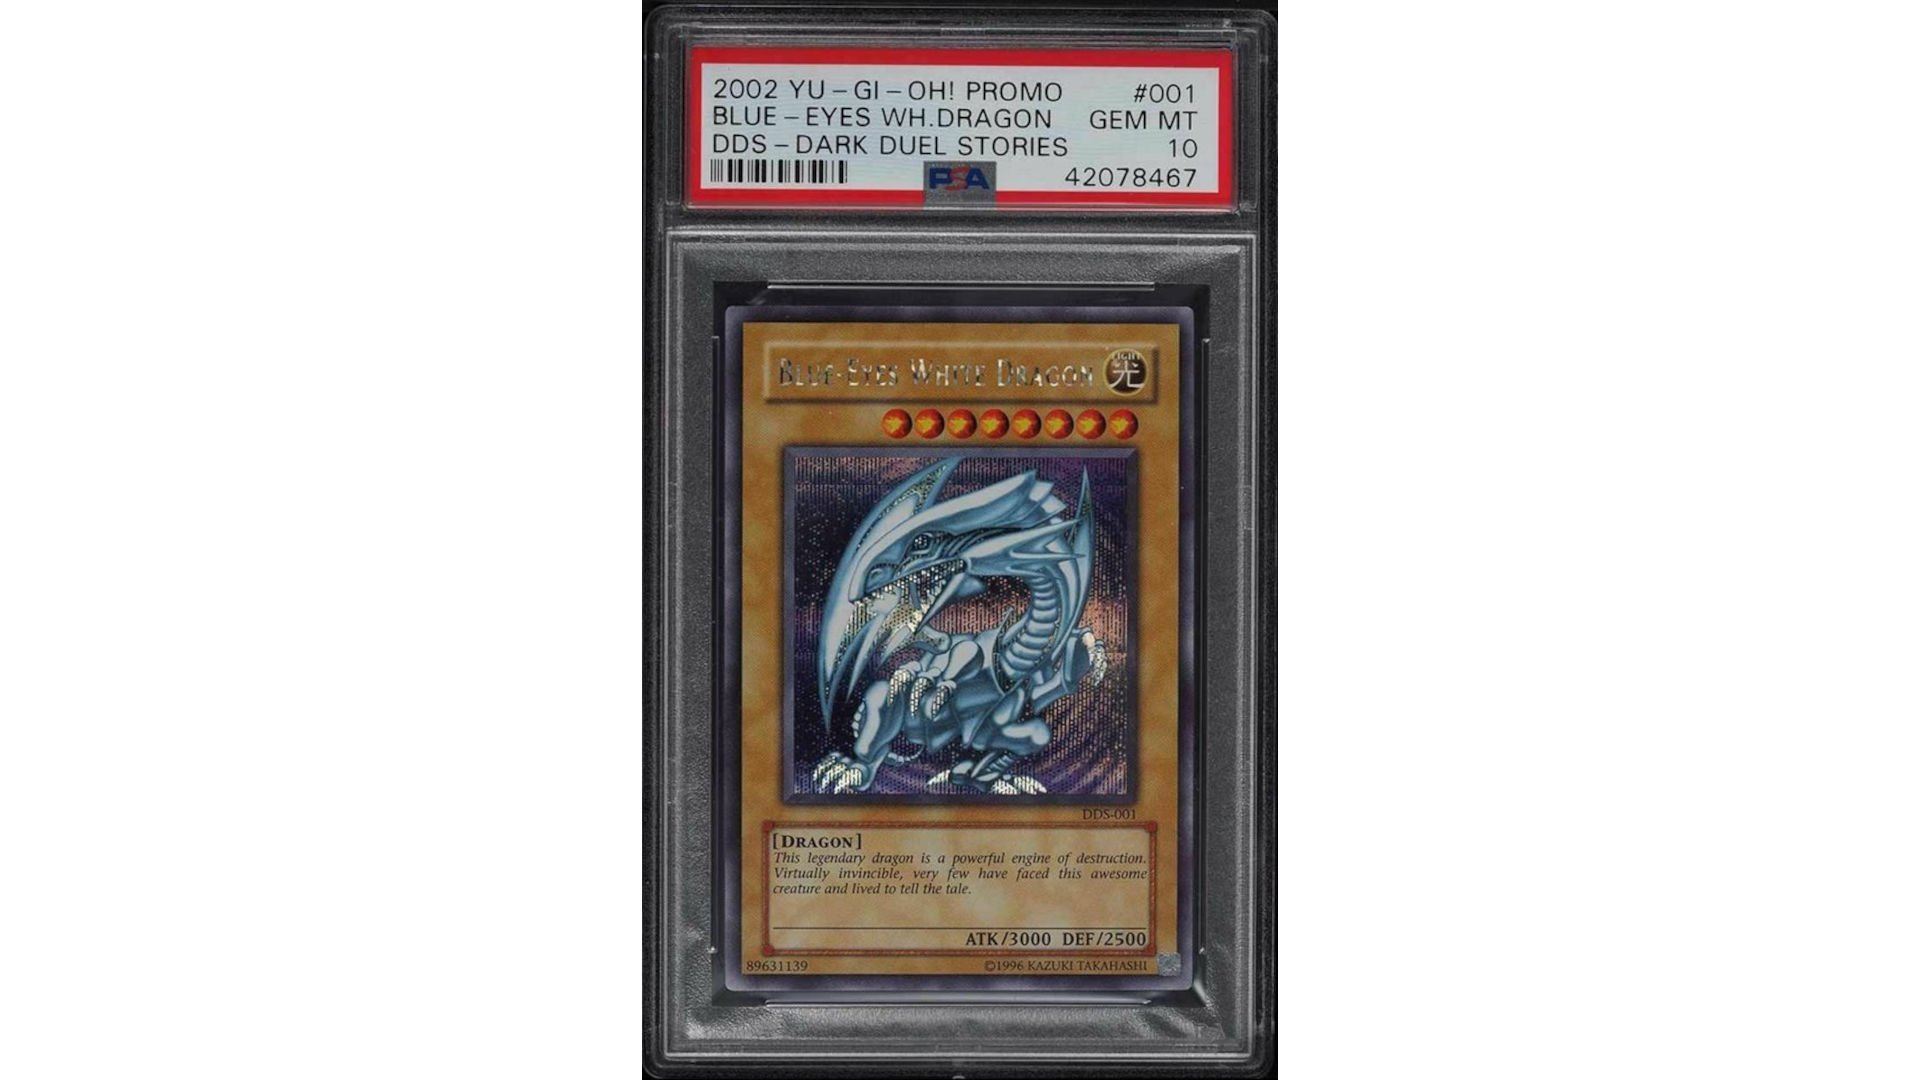 Most expensive Yugioh cards - a copy of Blue-Eyes White Dragon, a rare YuGiOh card